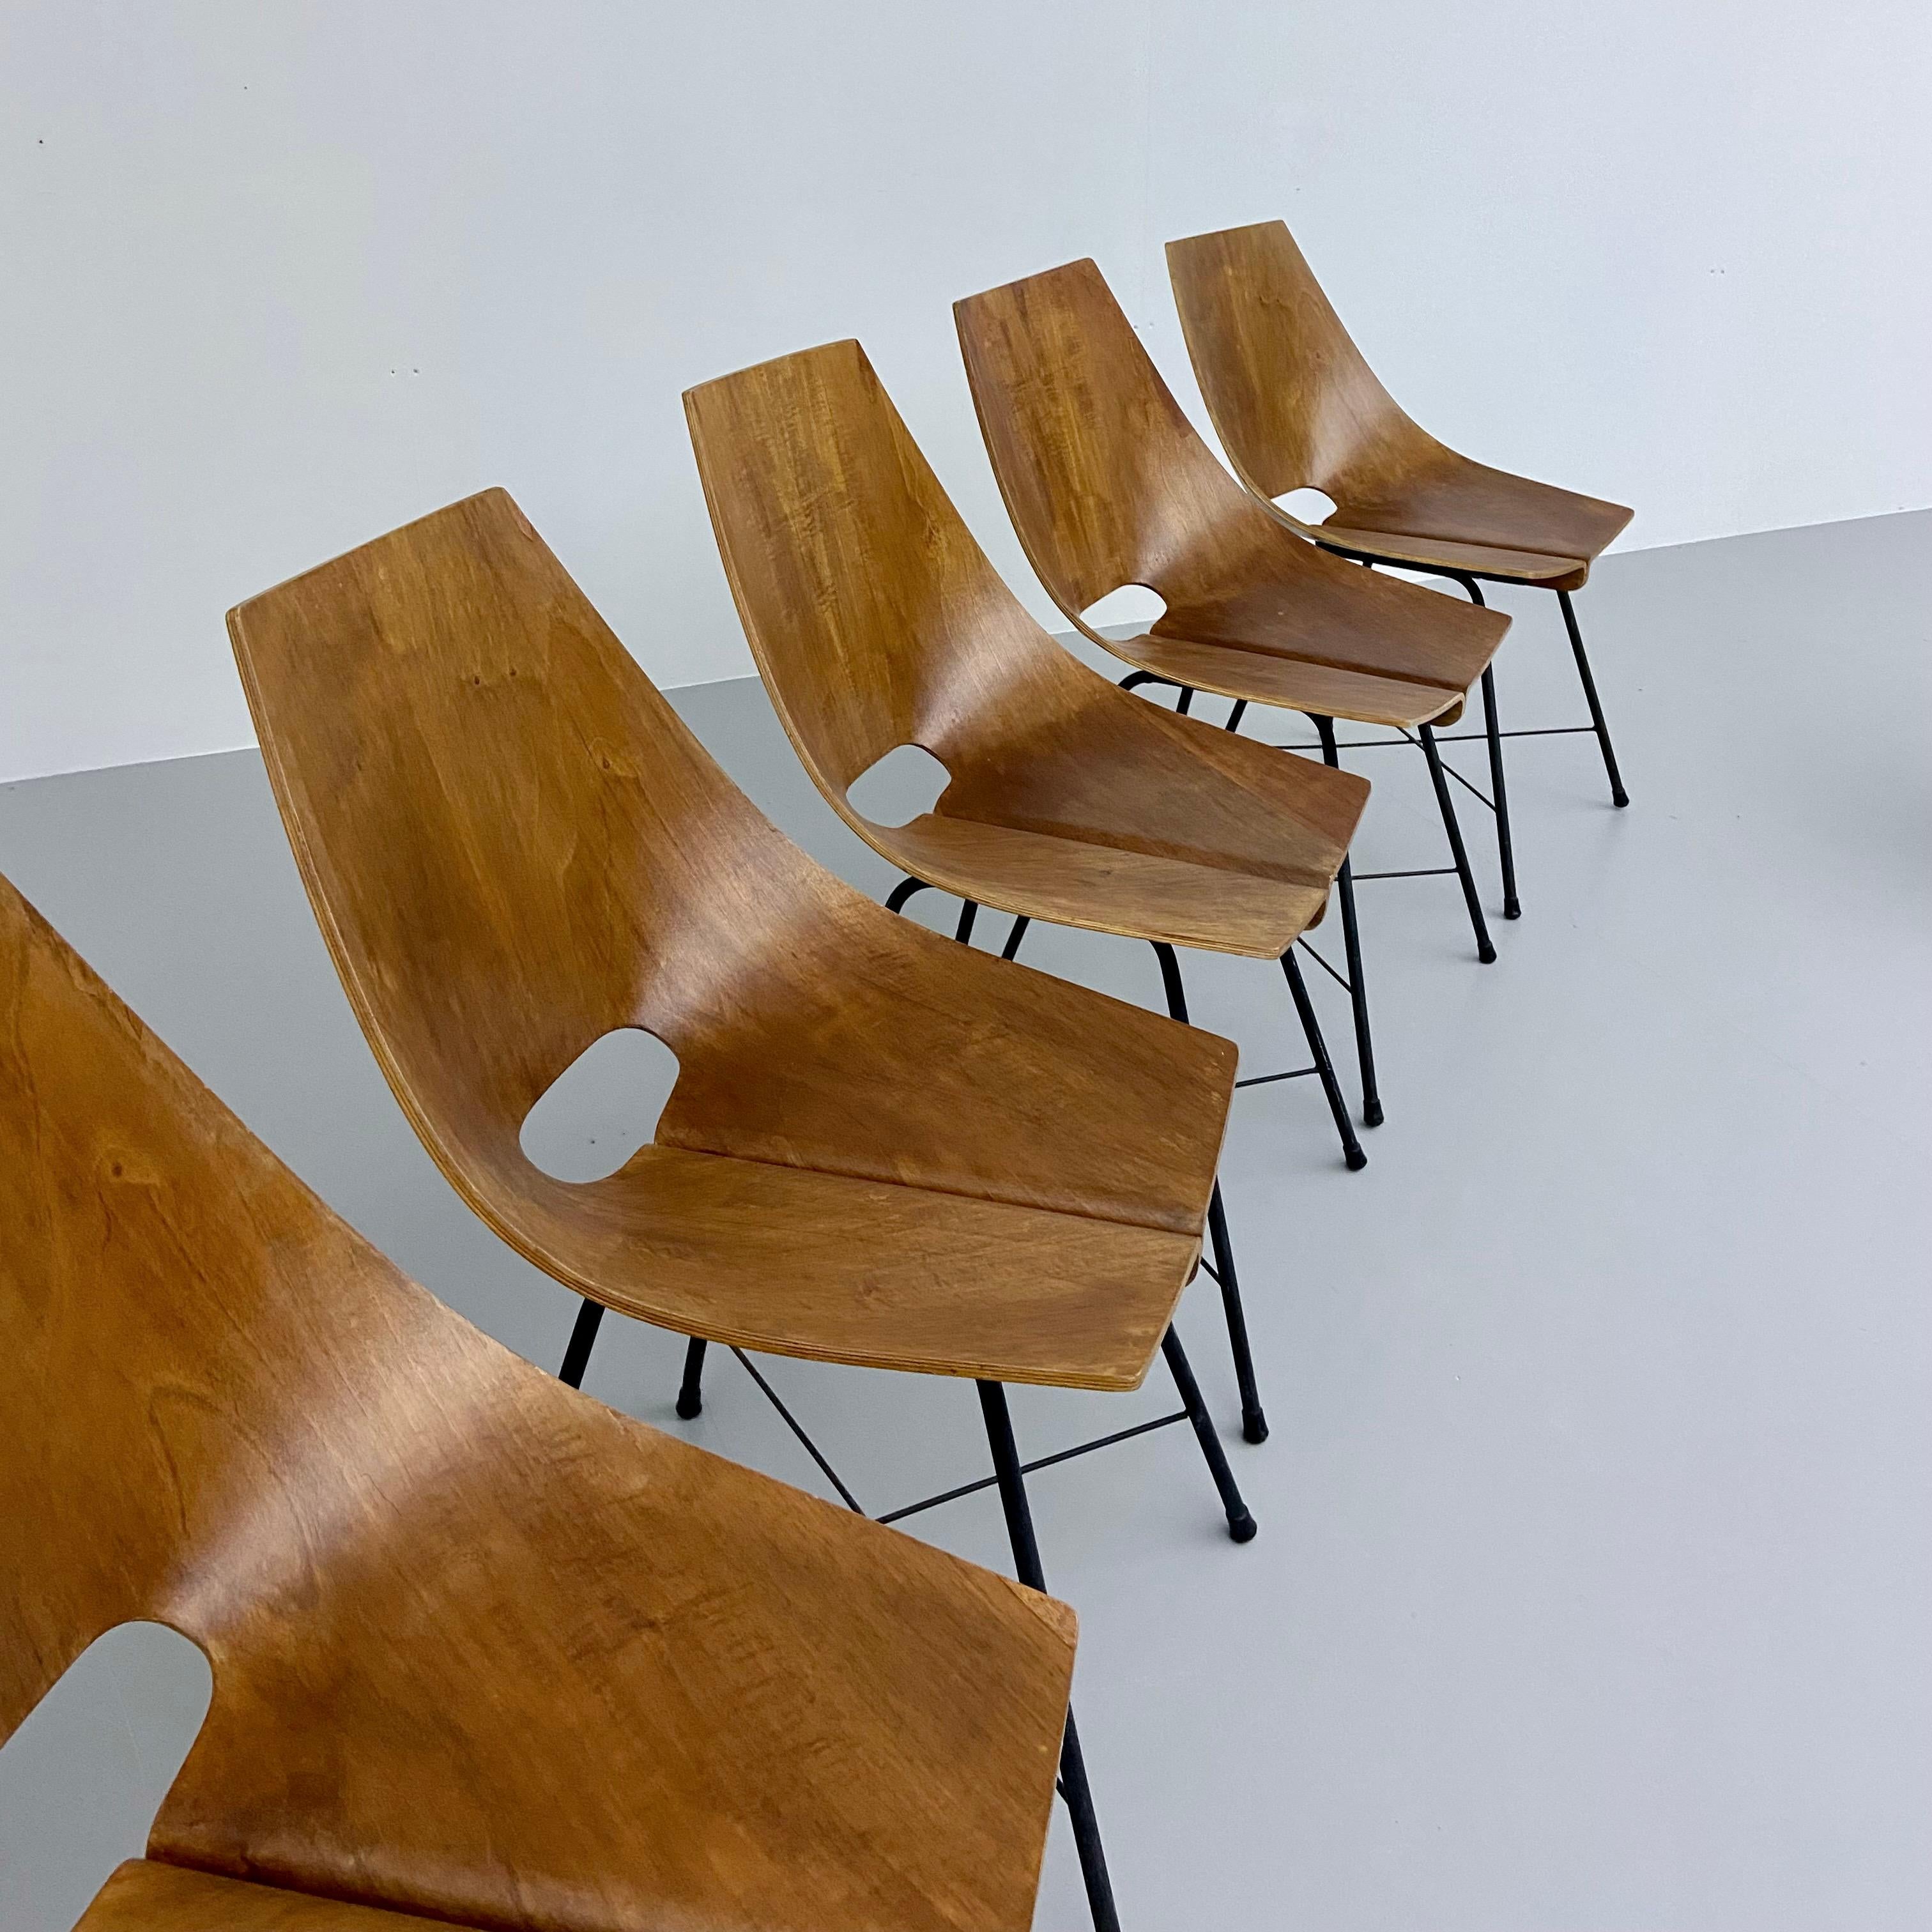 Set of 6 Dining Room Chairs by Carlo Ratti in Bended Wood and Metal, Italy, 1954 For Sale 2